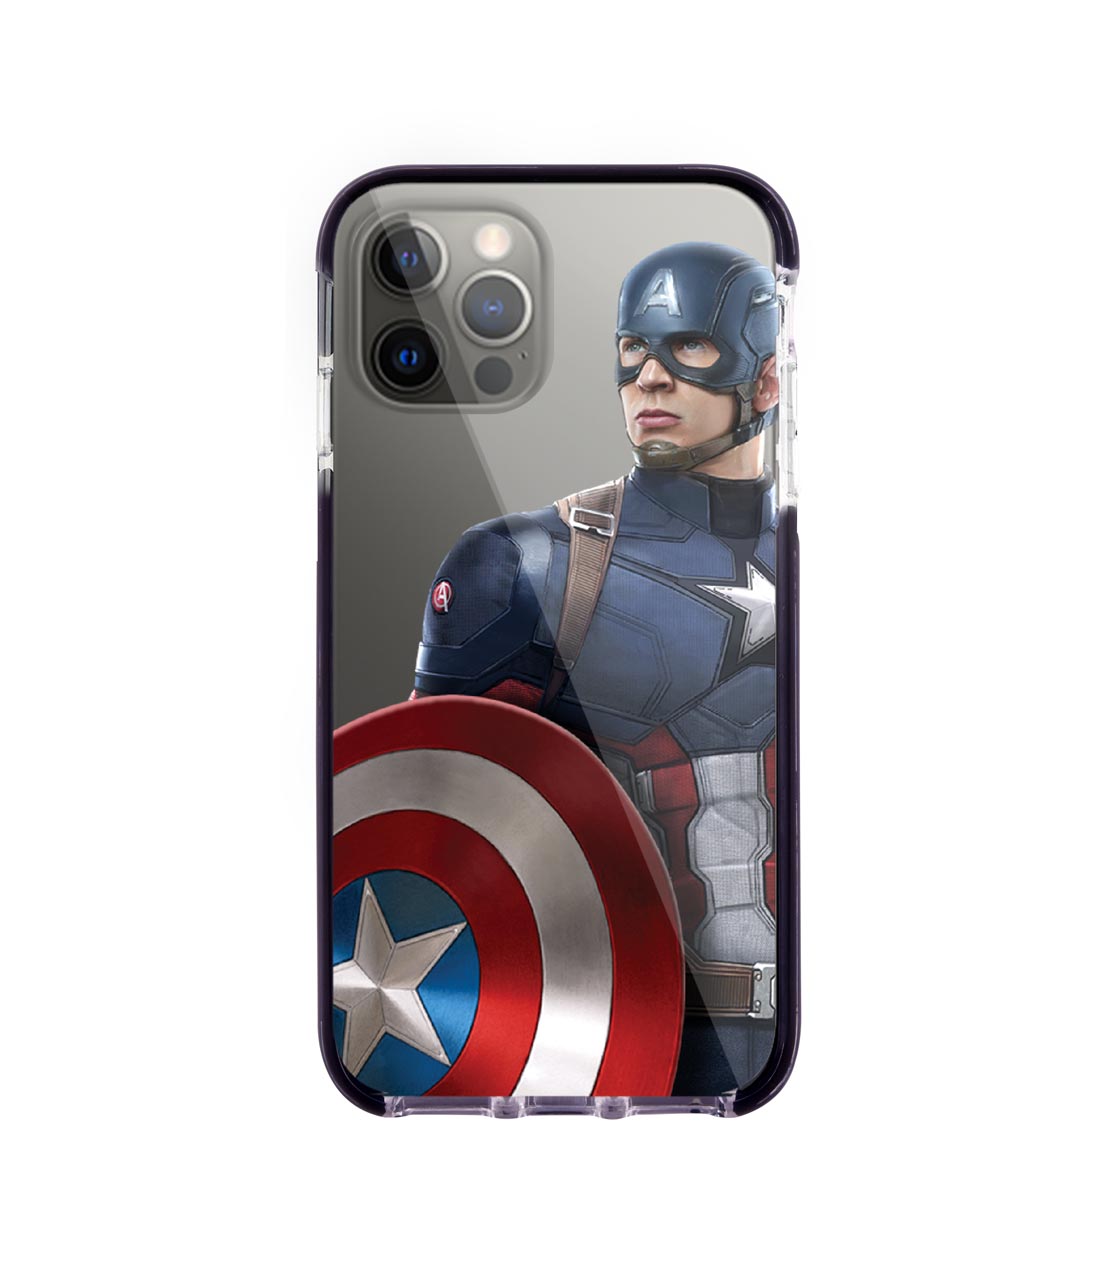 Team Blue Captain - Extreme Case for iPhone 12 Pro Max